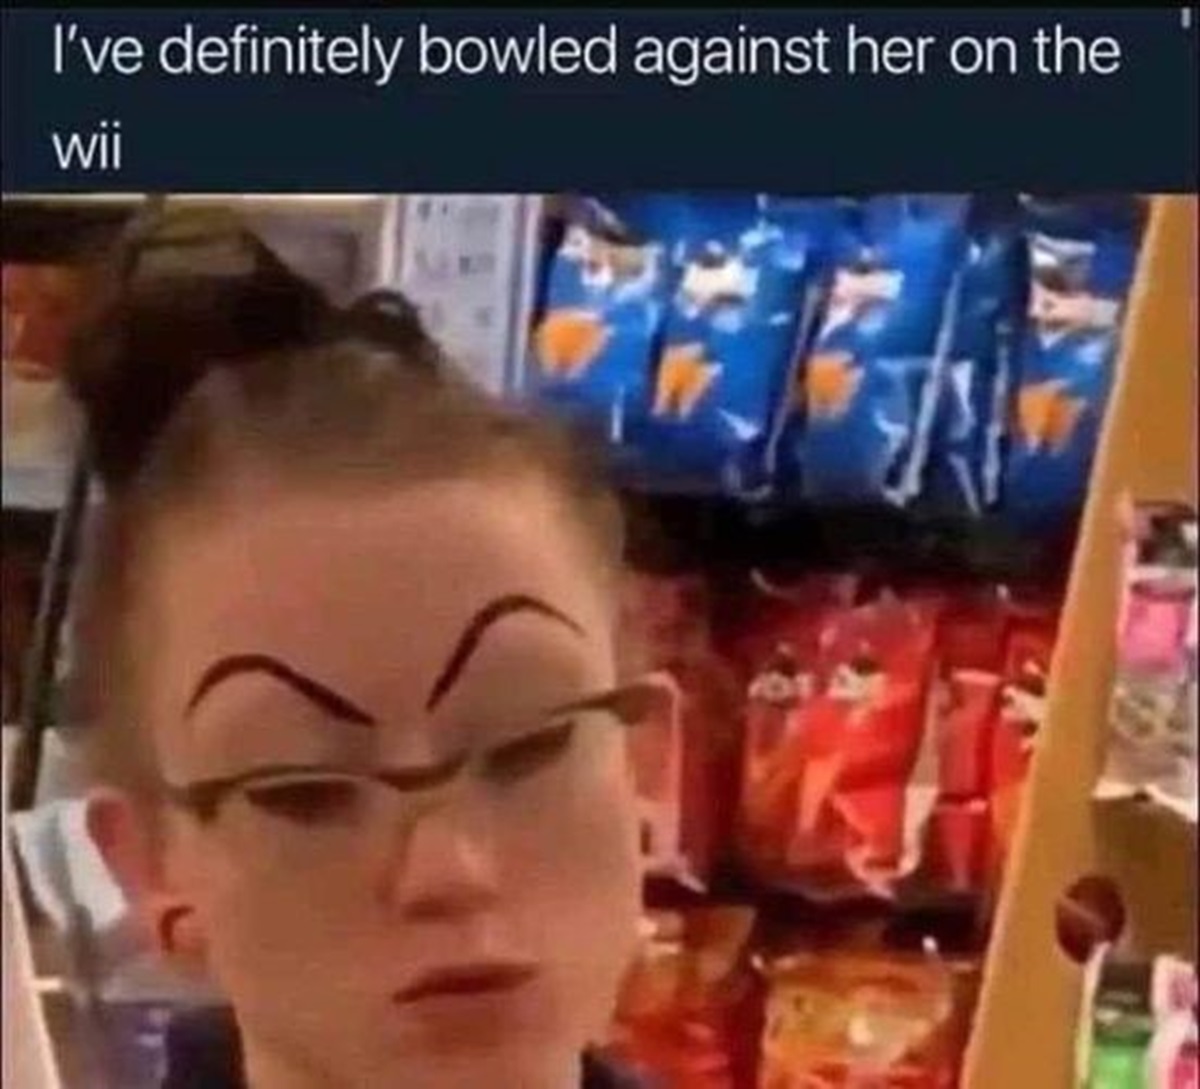 permanently surprised eyebrows - I've definitely bowled against her on the wii 101